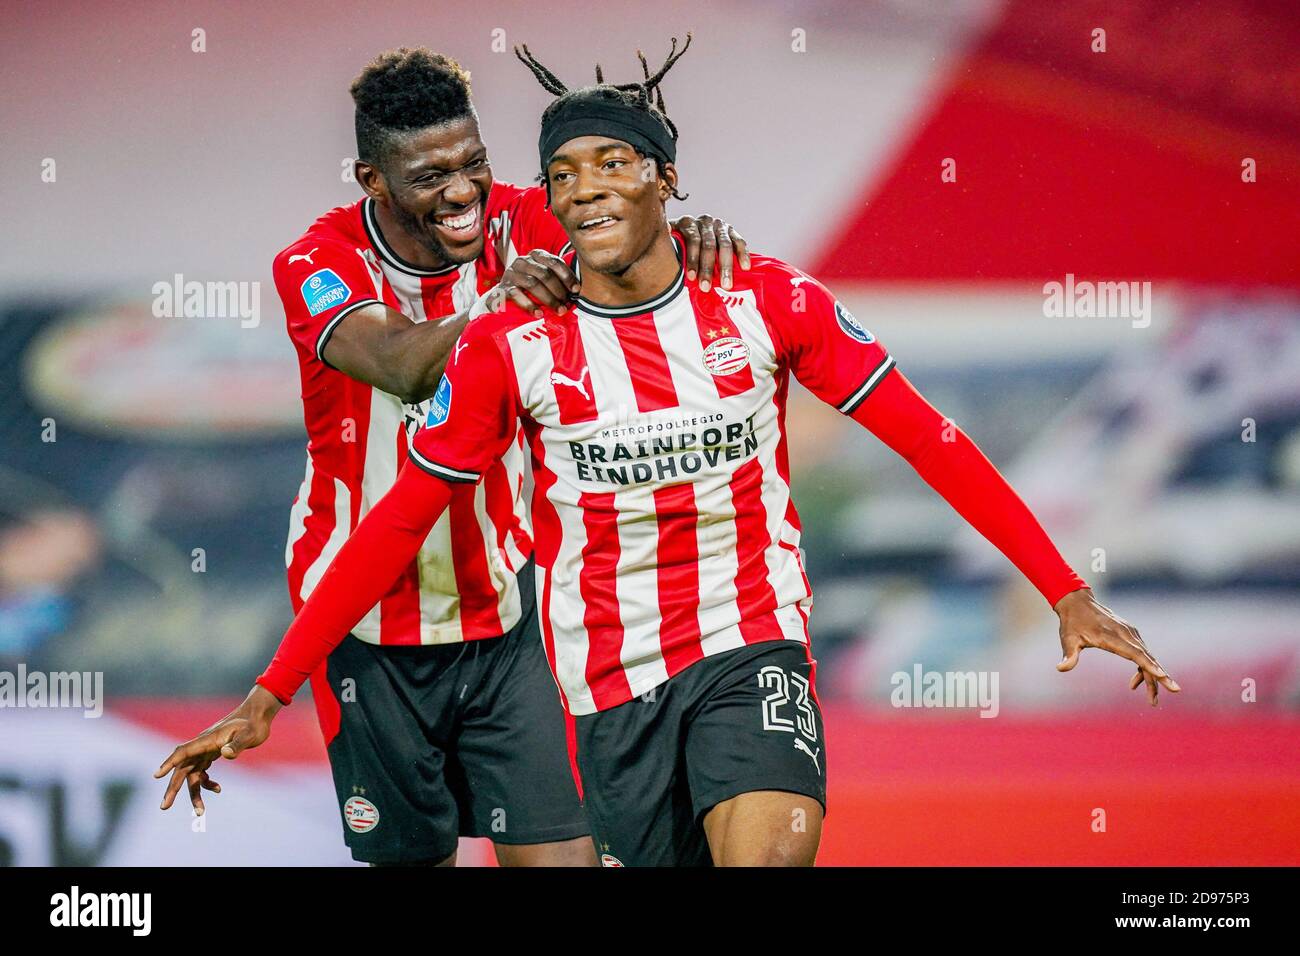 Noni Madueke Of Psv Eindhoven Celebrates After His Goal With Ibrahim Sangare During The Netherlands Championship Eredivisie Football Match Between P C Stock Photo Alamy